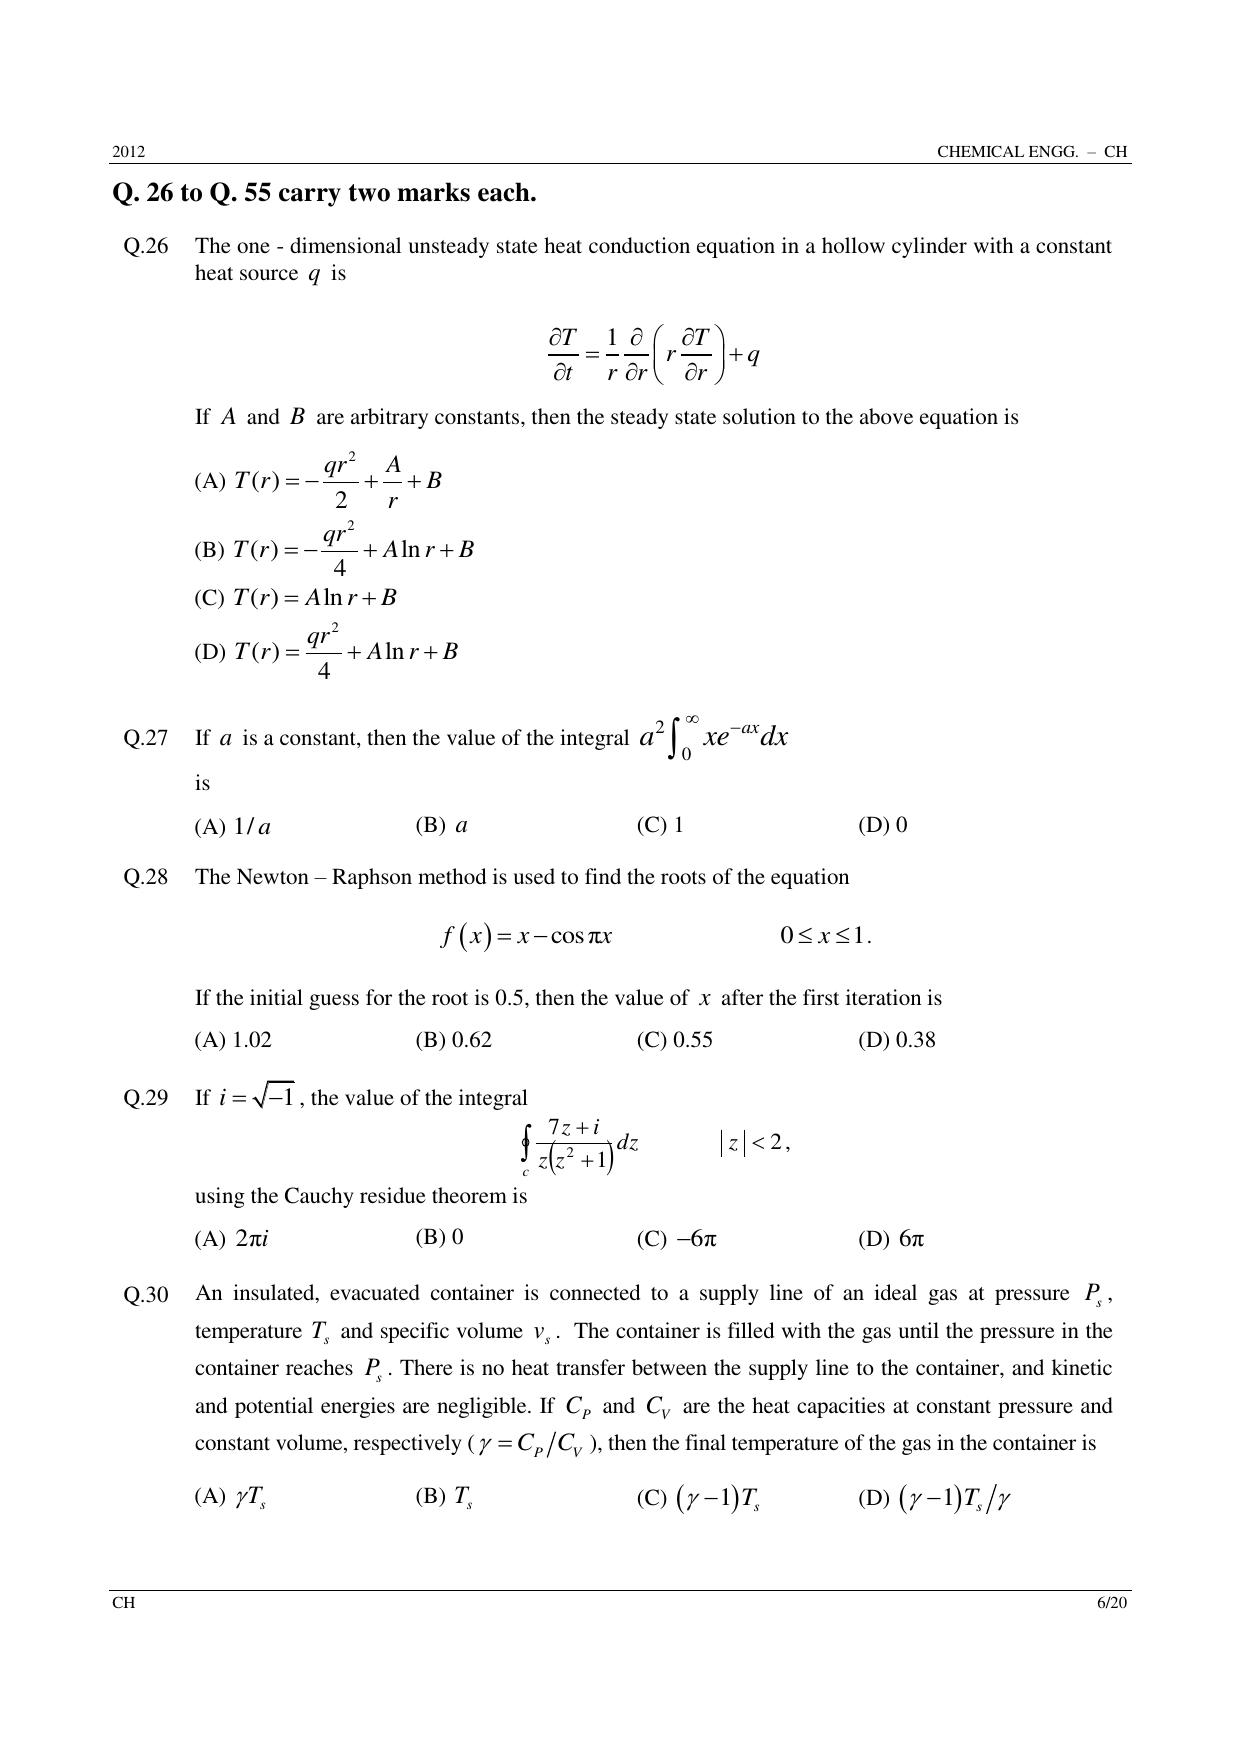 GATE 2012 Chemical Engineering (CH) Question Paper with Answer Key - Page 6